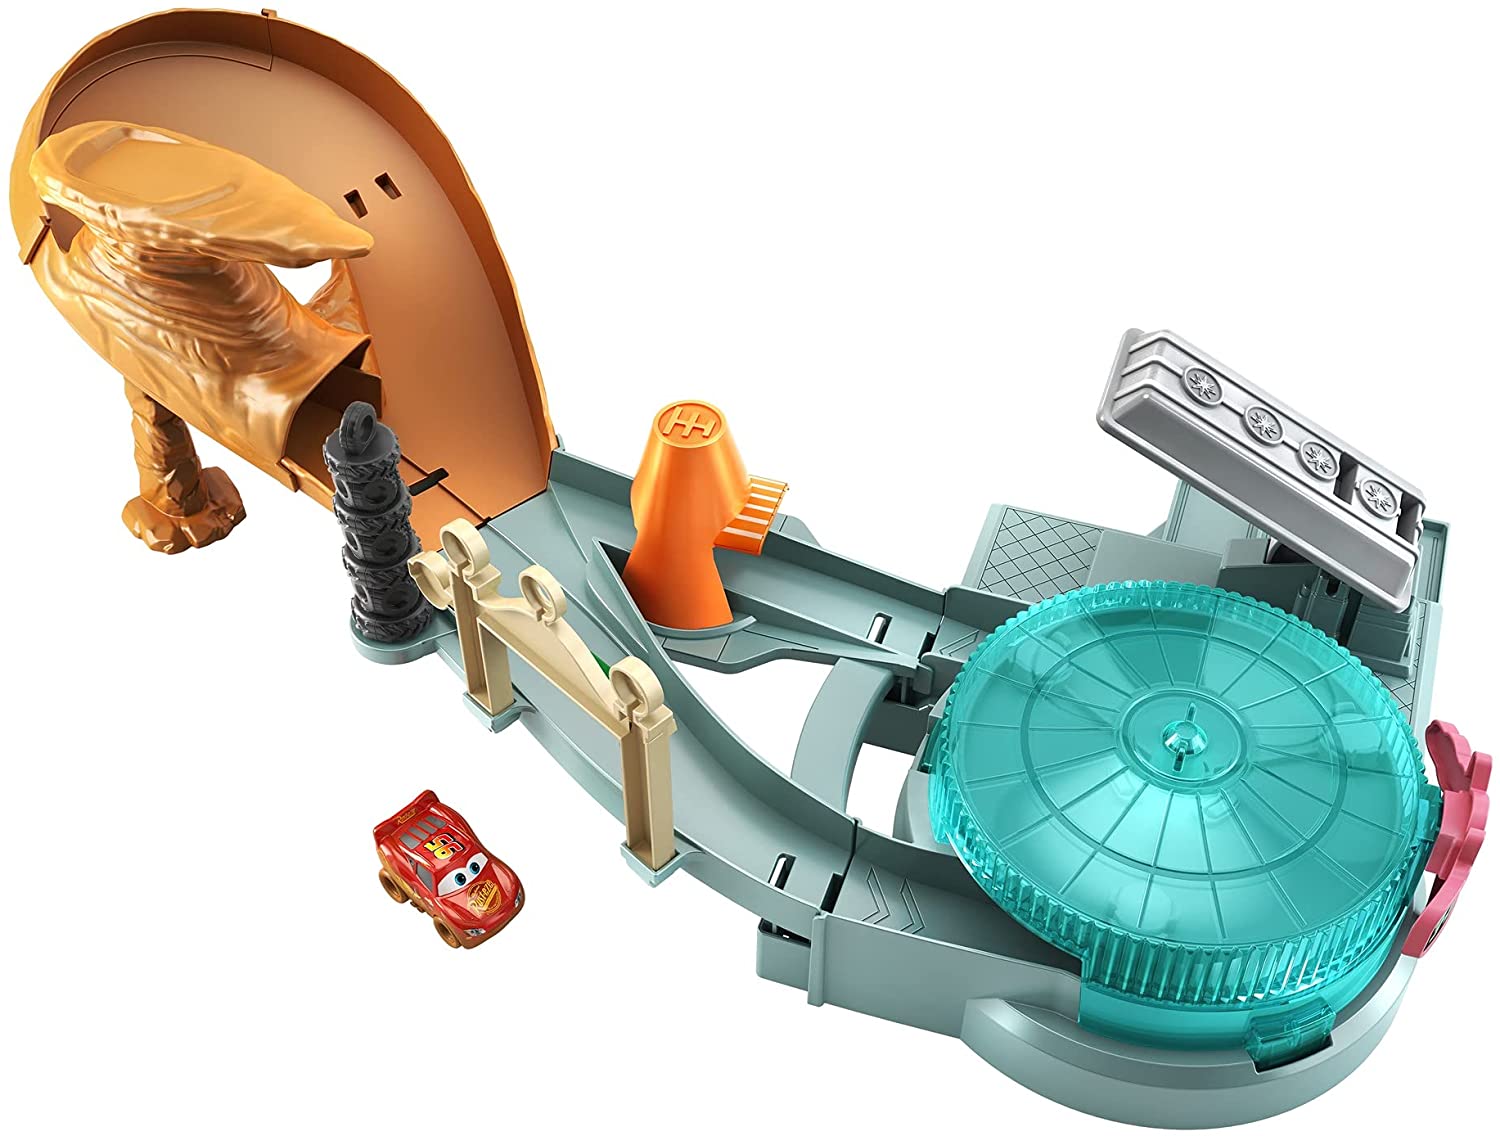 Disney Pixar Cars Mini Racers Radiator Springs Spin Out Playset w/ Lightning McQueen Vehicle $16 & More + FS w/ Amazon Prime, FS on $25+